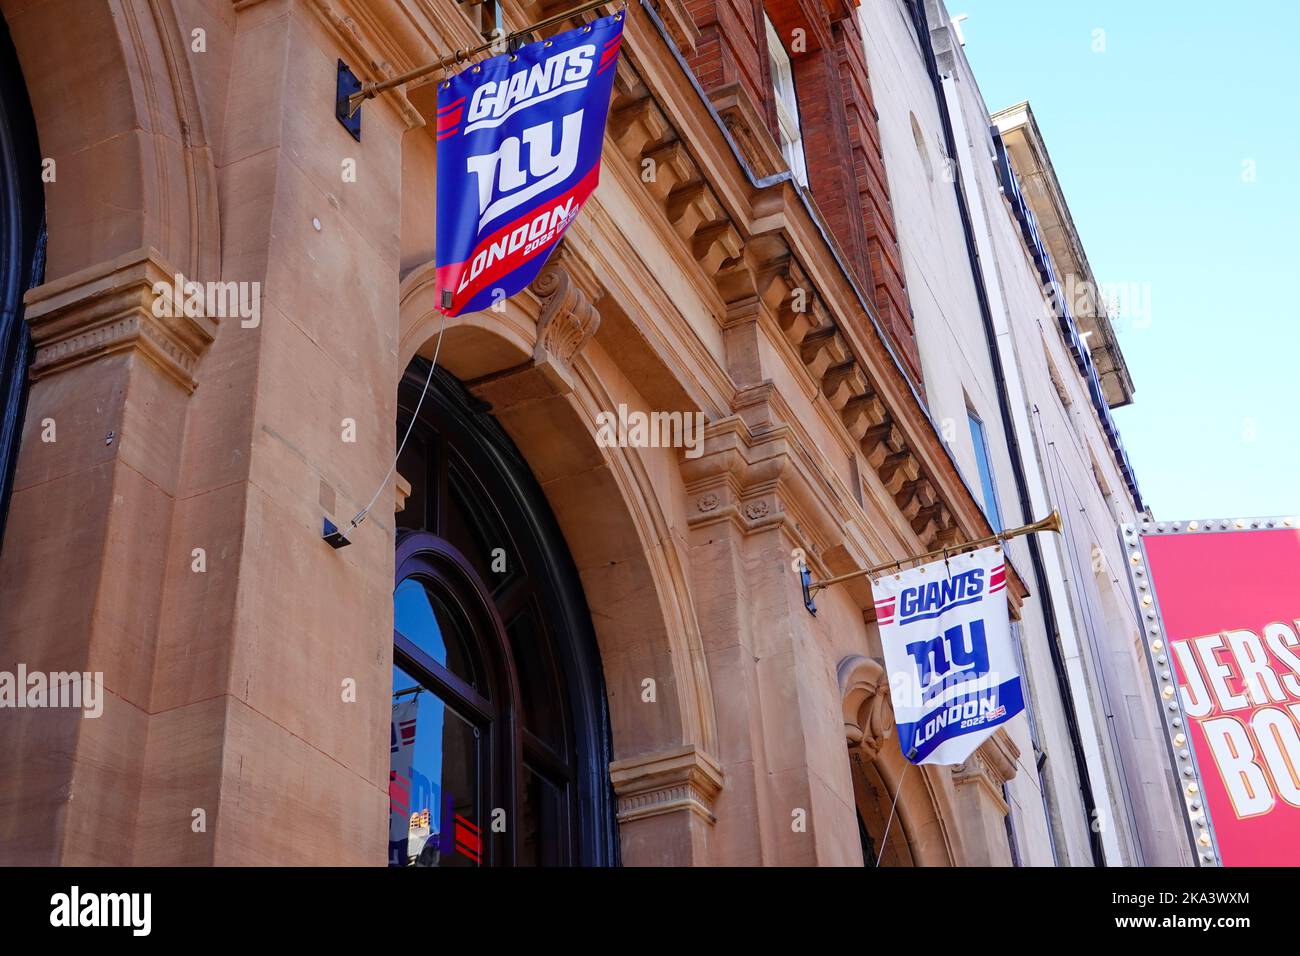 New York Giants London 2022 banners on building in central London the day after the Giants beat the Green Bay Packers in American Football in the UK. Stock Photo